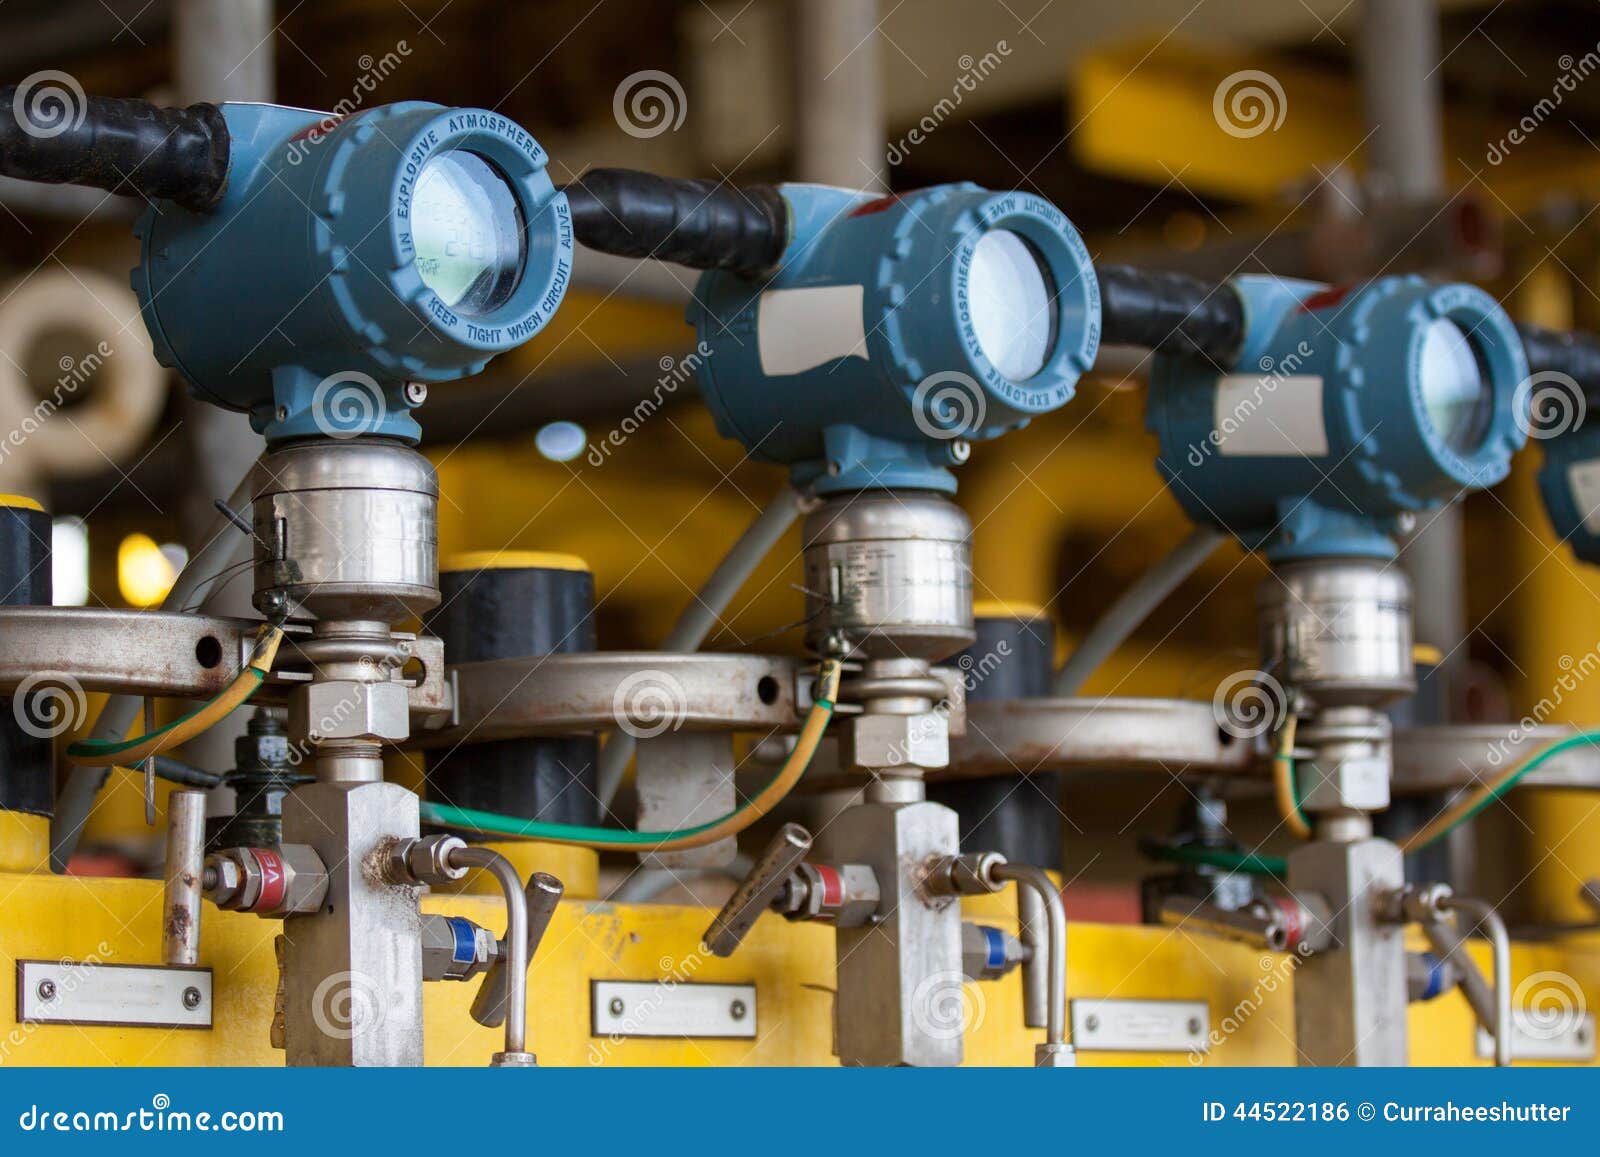 pressure transmitter in oil and gas process , send signal to controller and reading pressure in the system